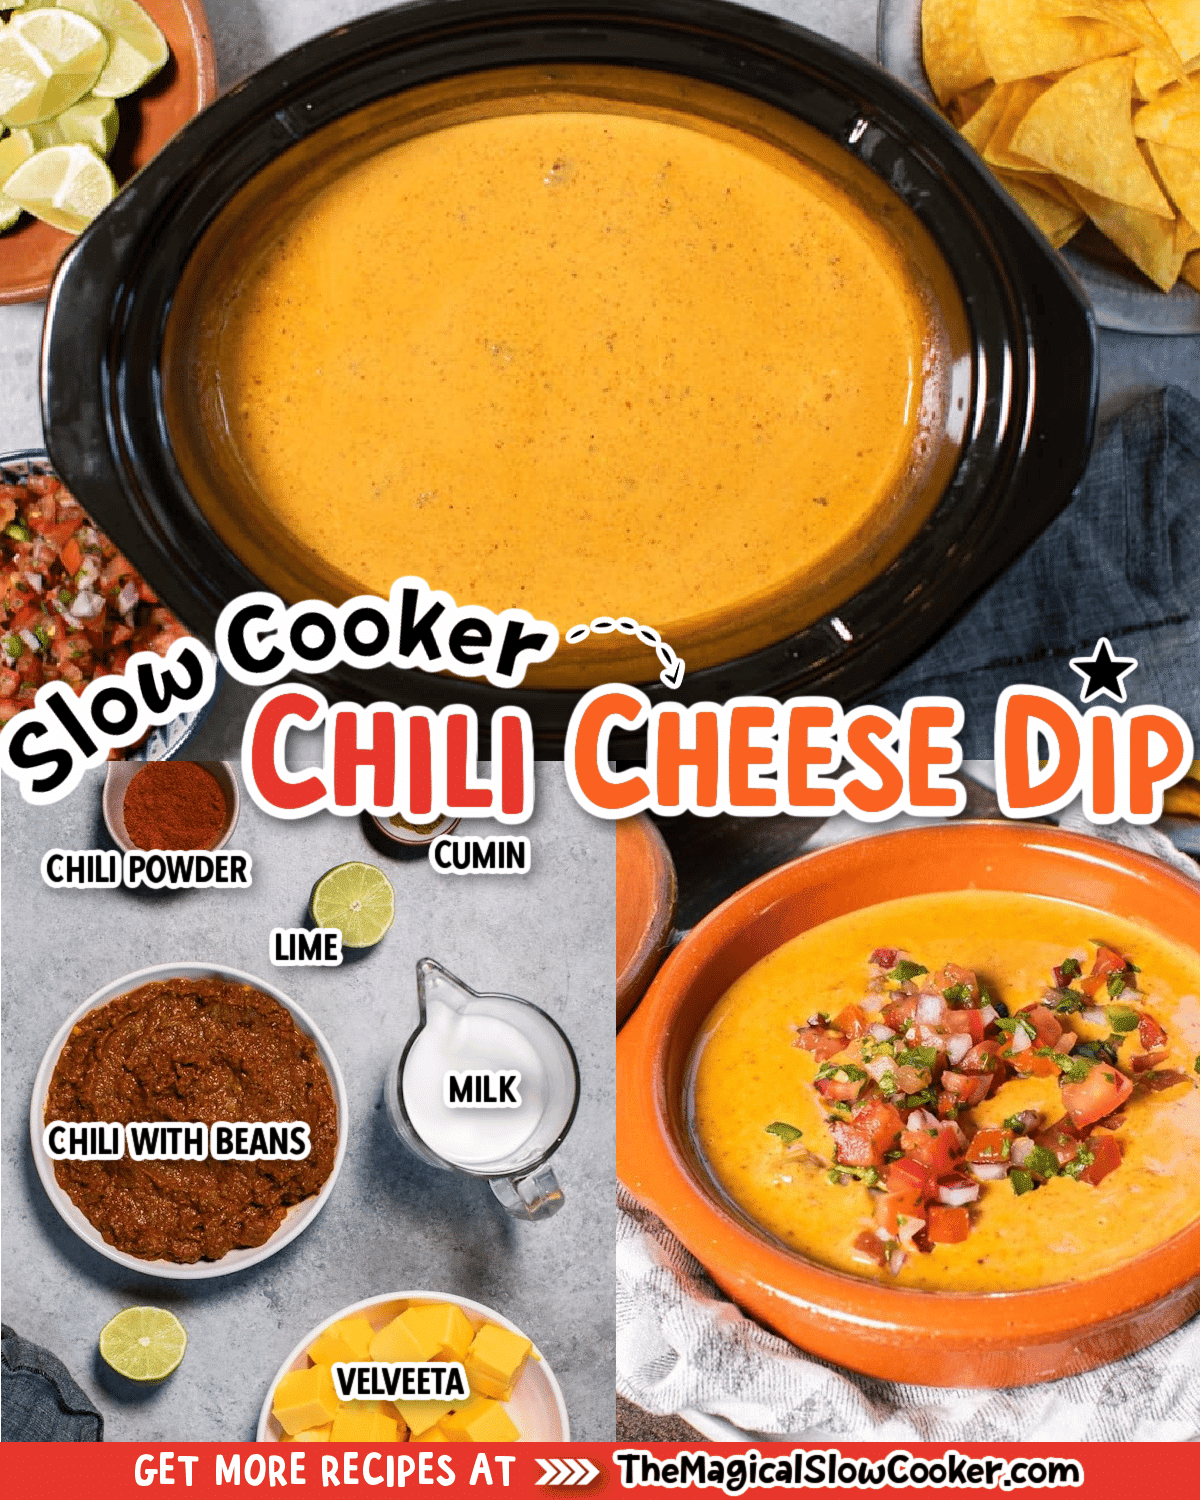 images of chili cheese dip with the ingredients labeled in text.